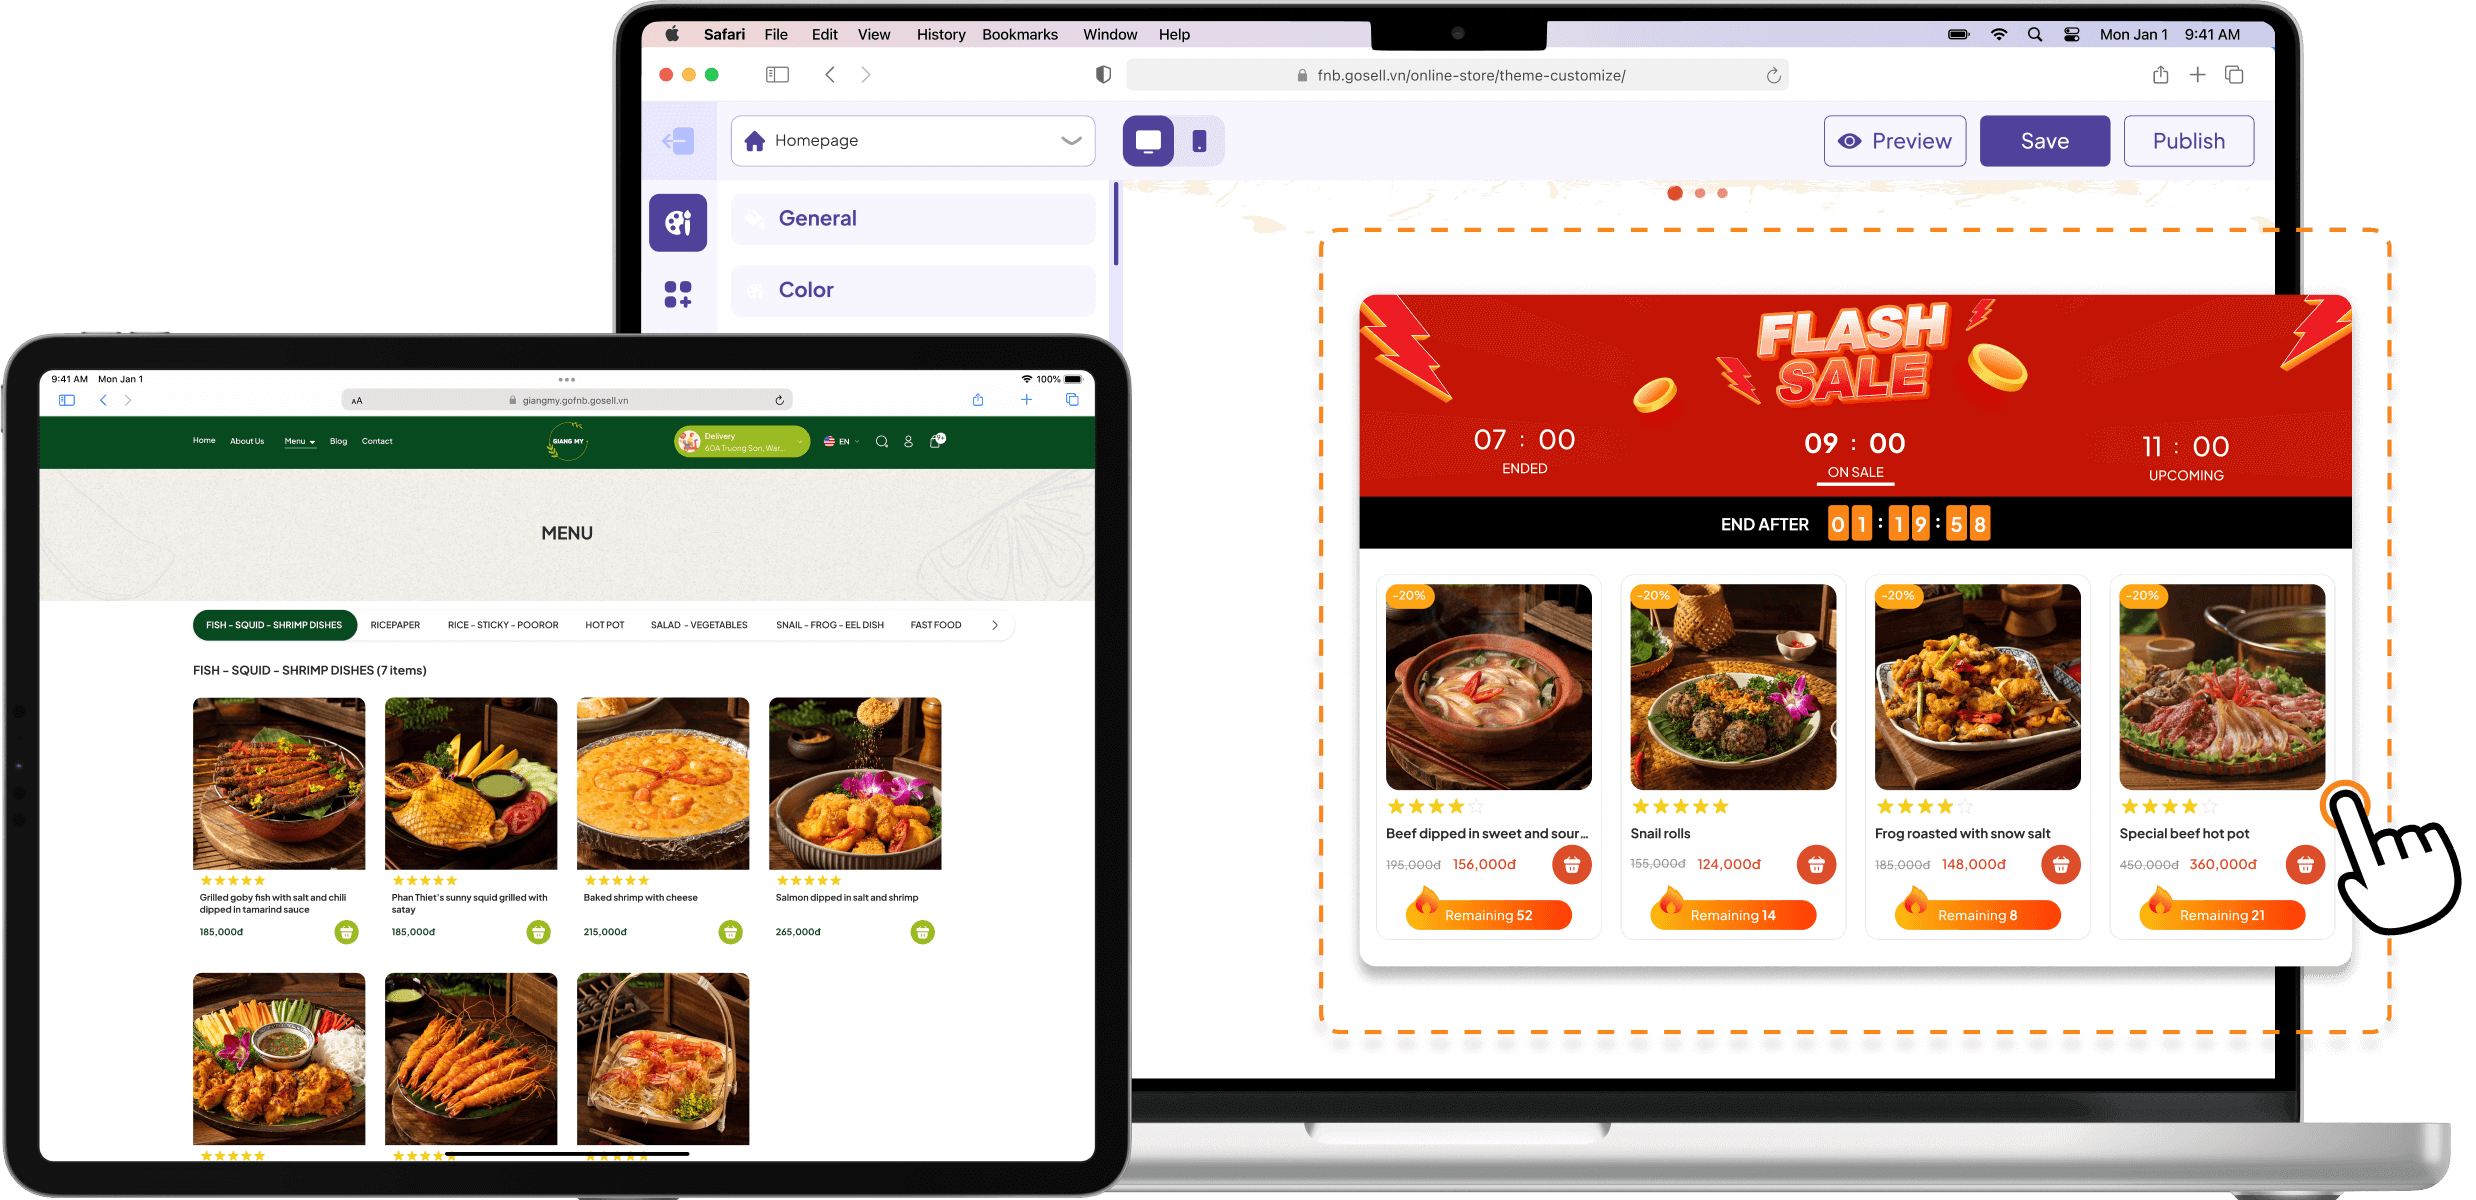 Create your own food ordering website for your restaurant/diner
            with just a few drag-and-drop